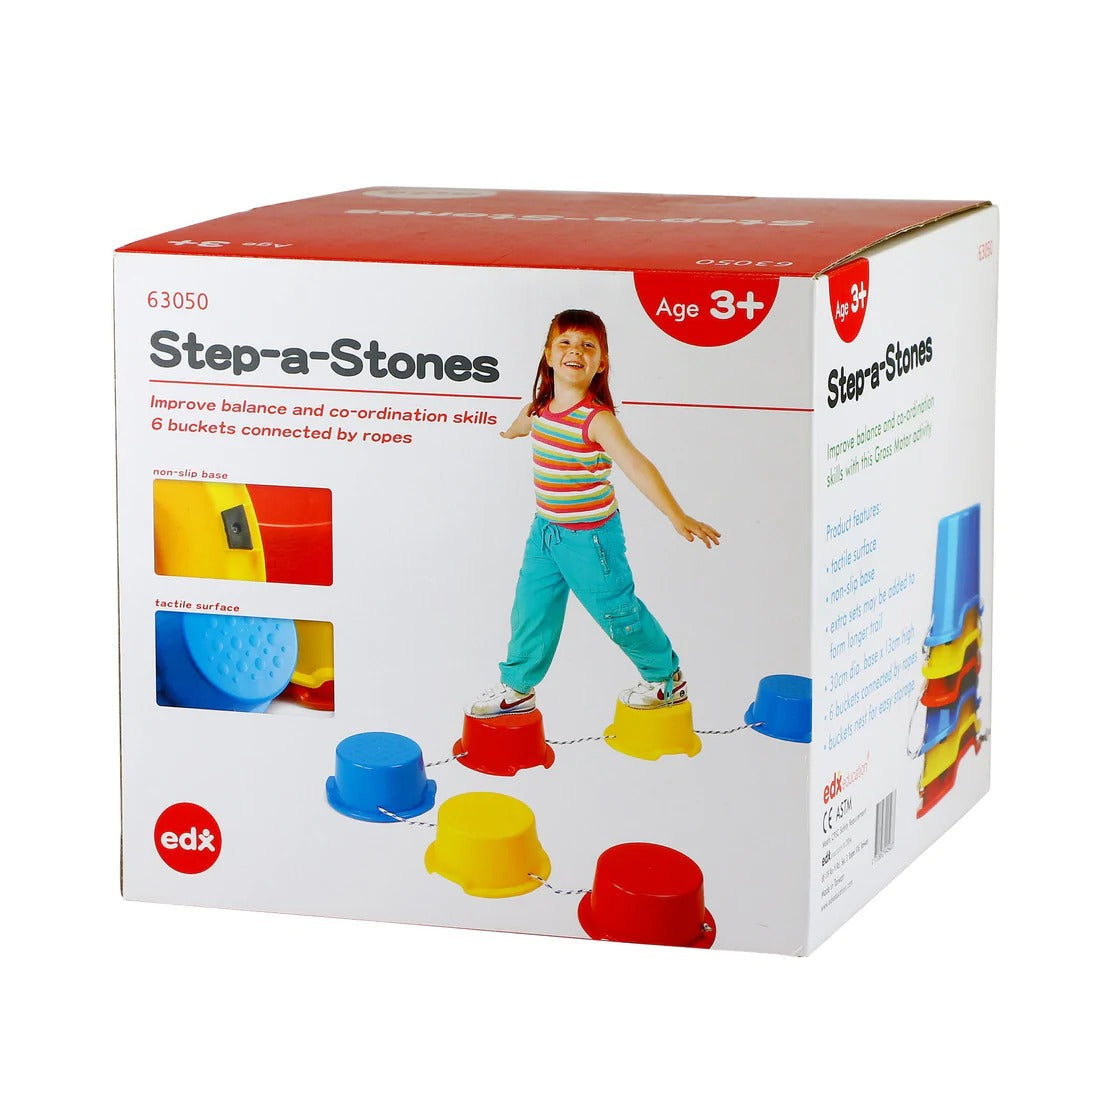 Balance Steps, Set of 6 sturdy flat topped Balance Step a Stones connected with ropes which may be adjusted. Each Balance Step a Stones has a pimpled platform to help prevent slipping. Children will gain confidence and improve balance as they progress from stepping on each Balance Step a Stone over short gaps to jumping over longer gaps. Create an exciting path for a journey of learning through play with our edx education Step-A-Stones! Ideal for improving coordination, balance and gross motor skills. Can b